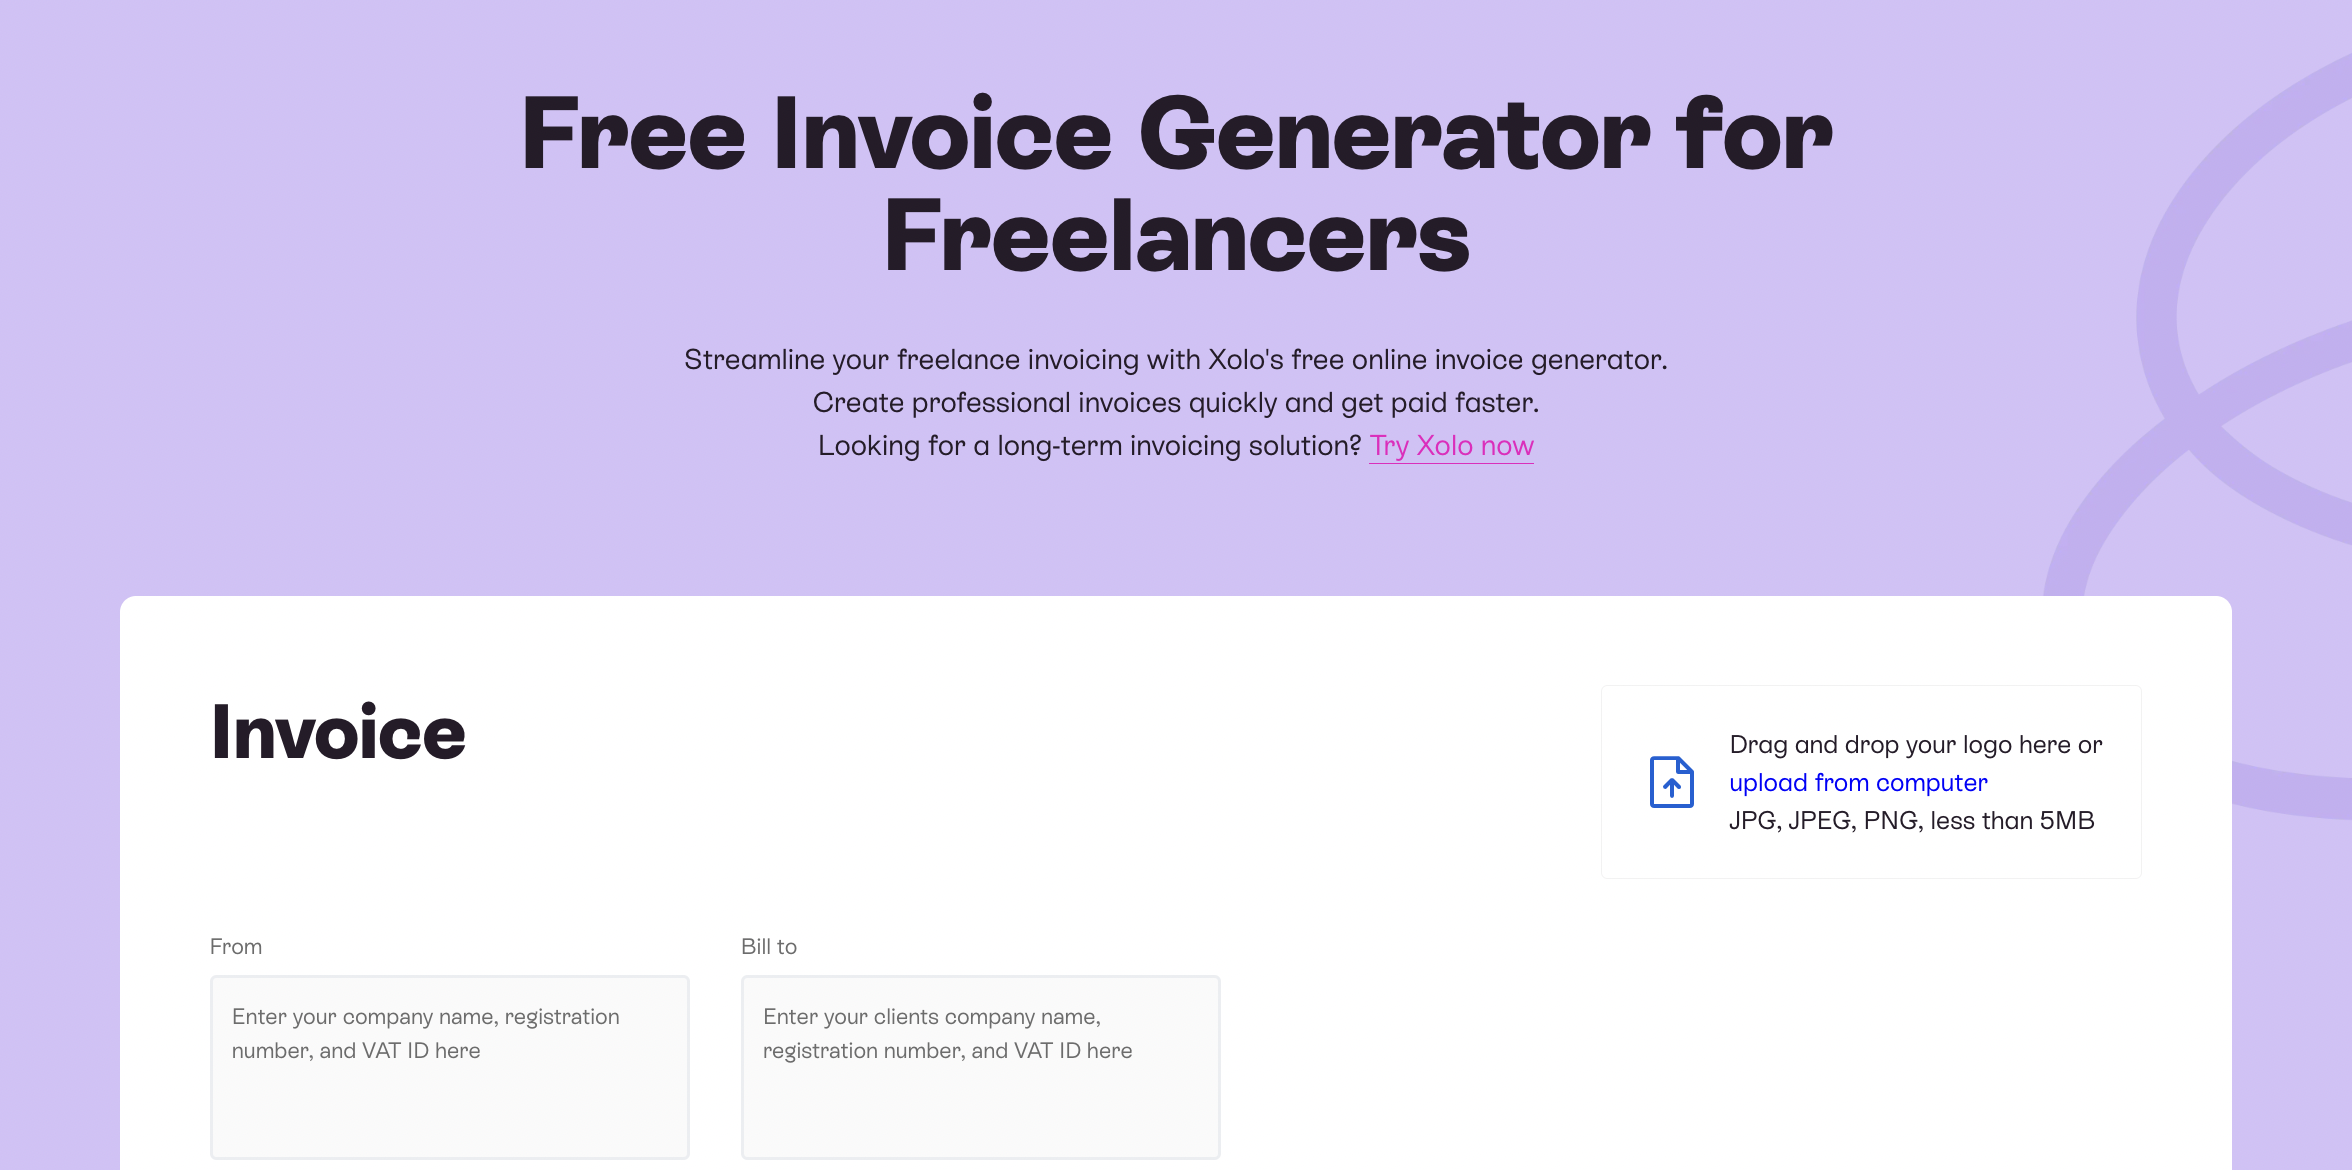 Free invoice generator for freelancers by Xolo